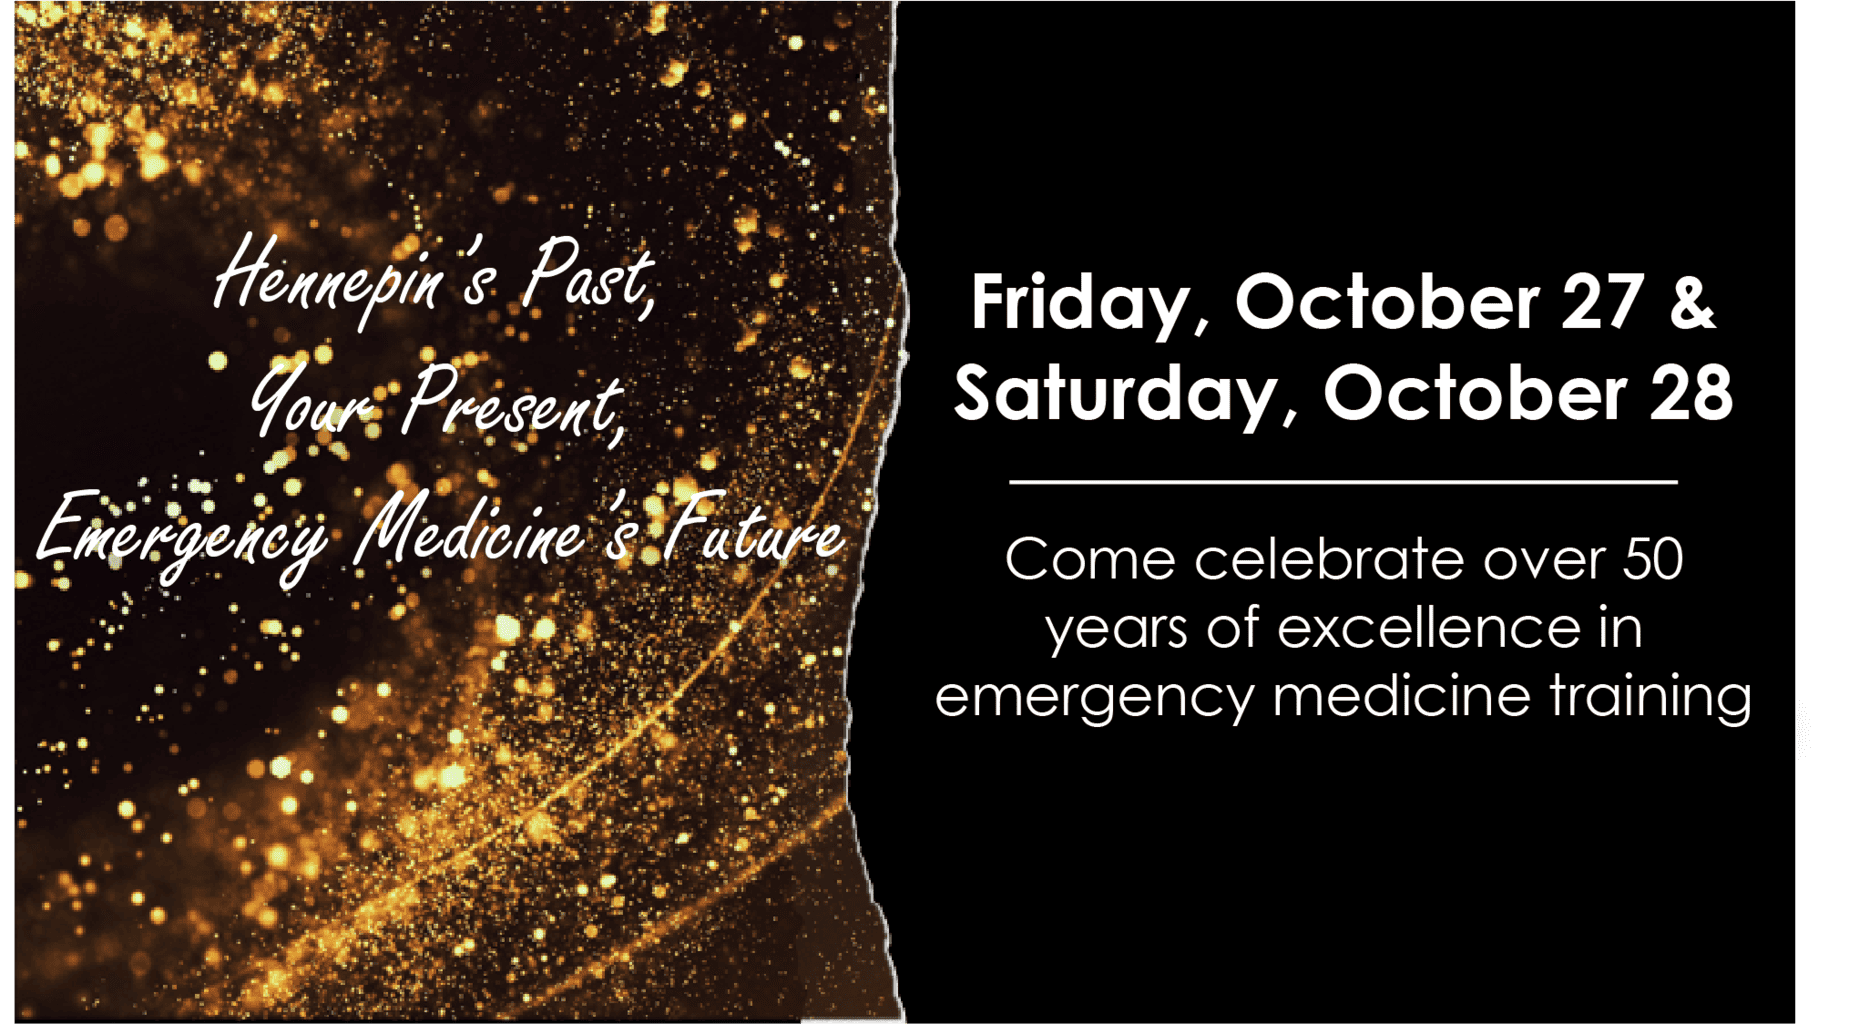 Friday, October 27 and Saturday, October 28 - come celebrate with us